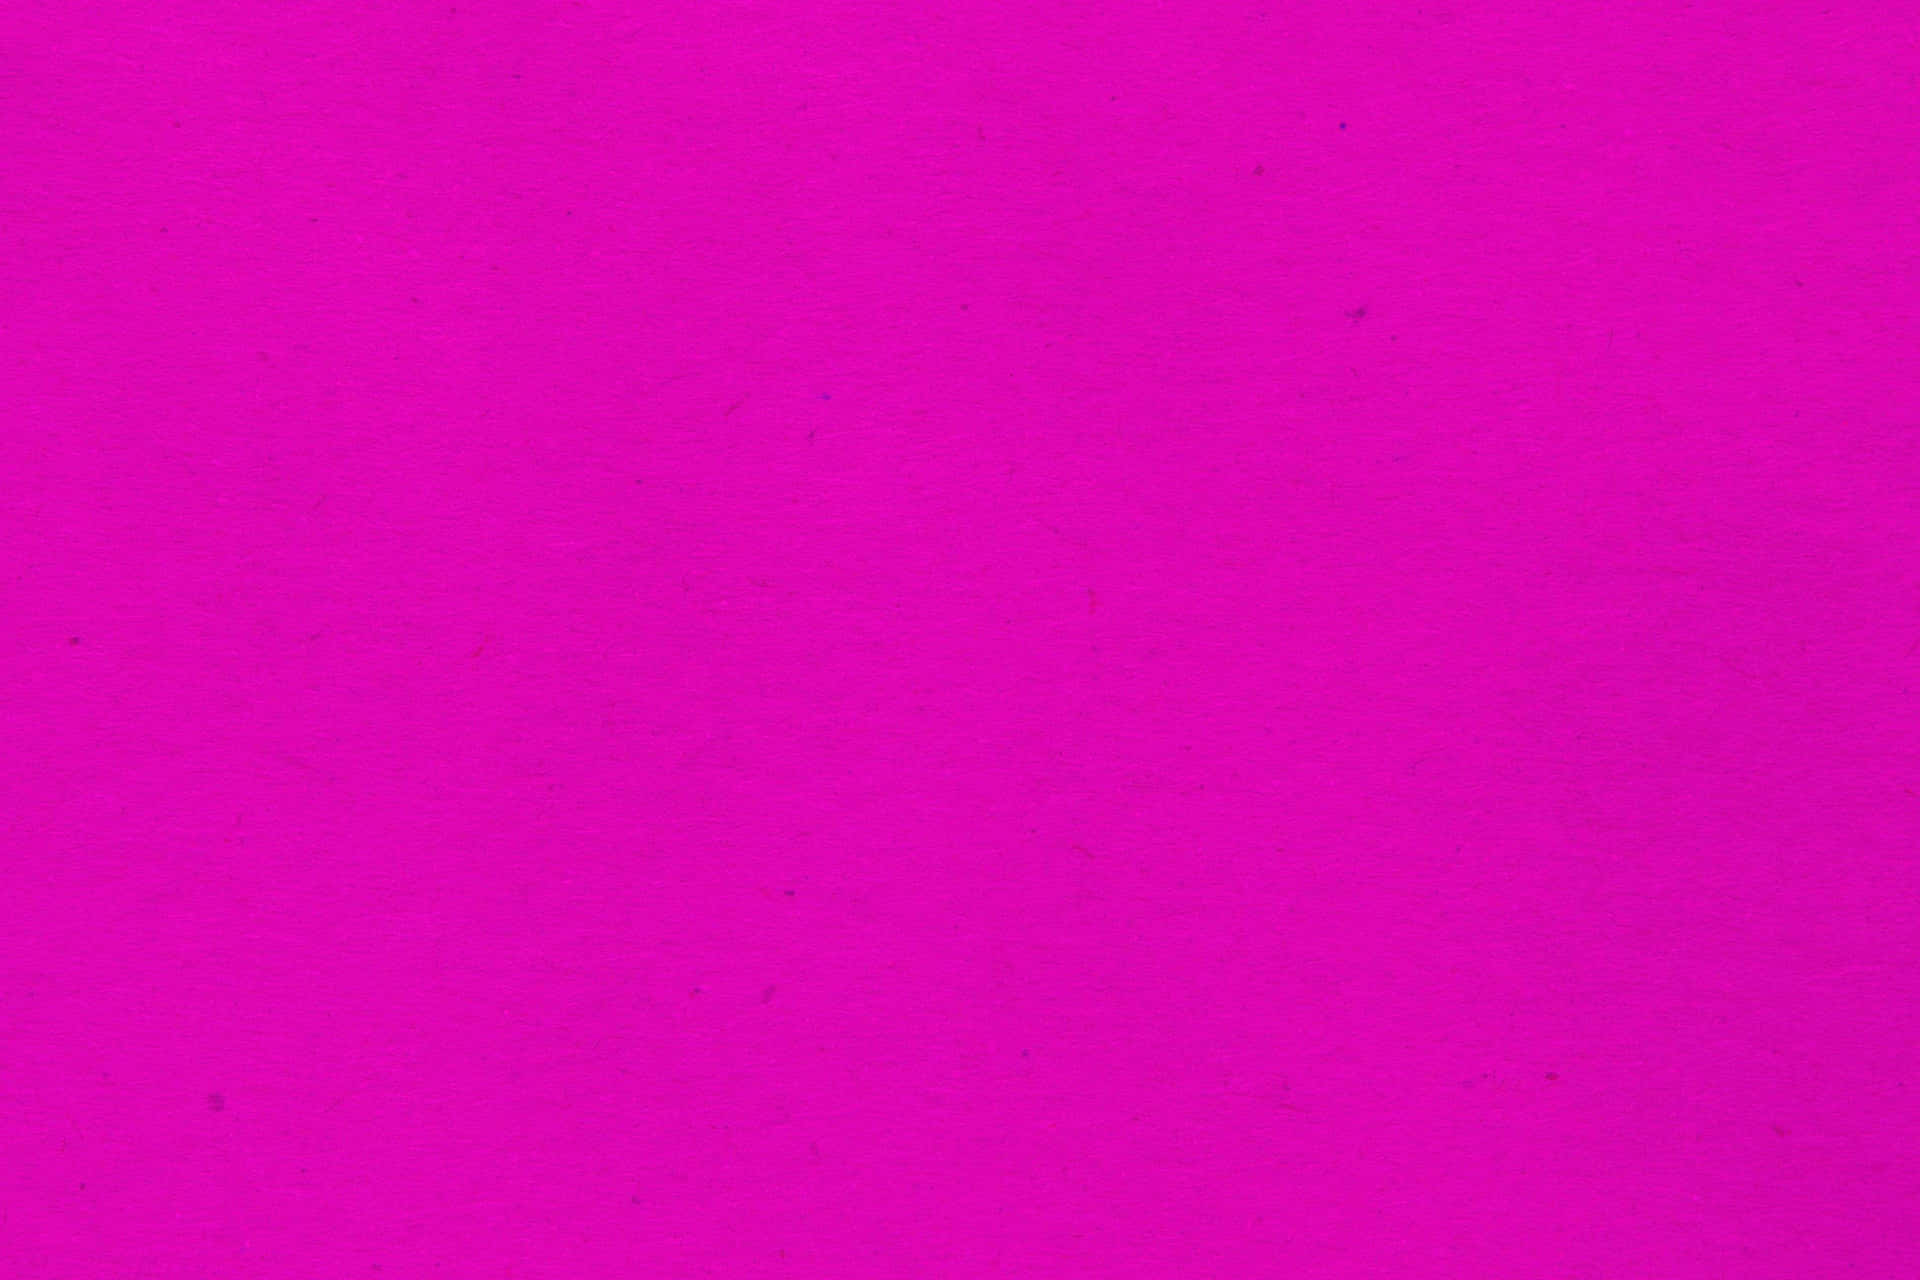 Put some bright neon pink in your life Wallpaper